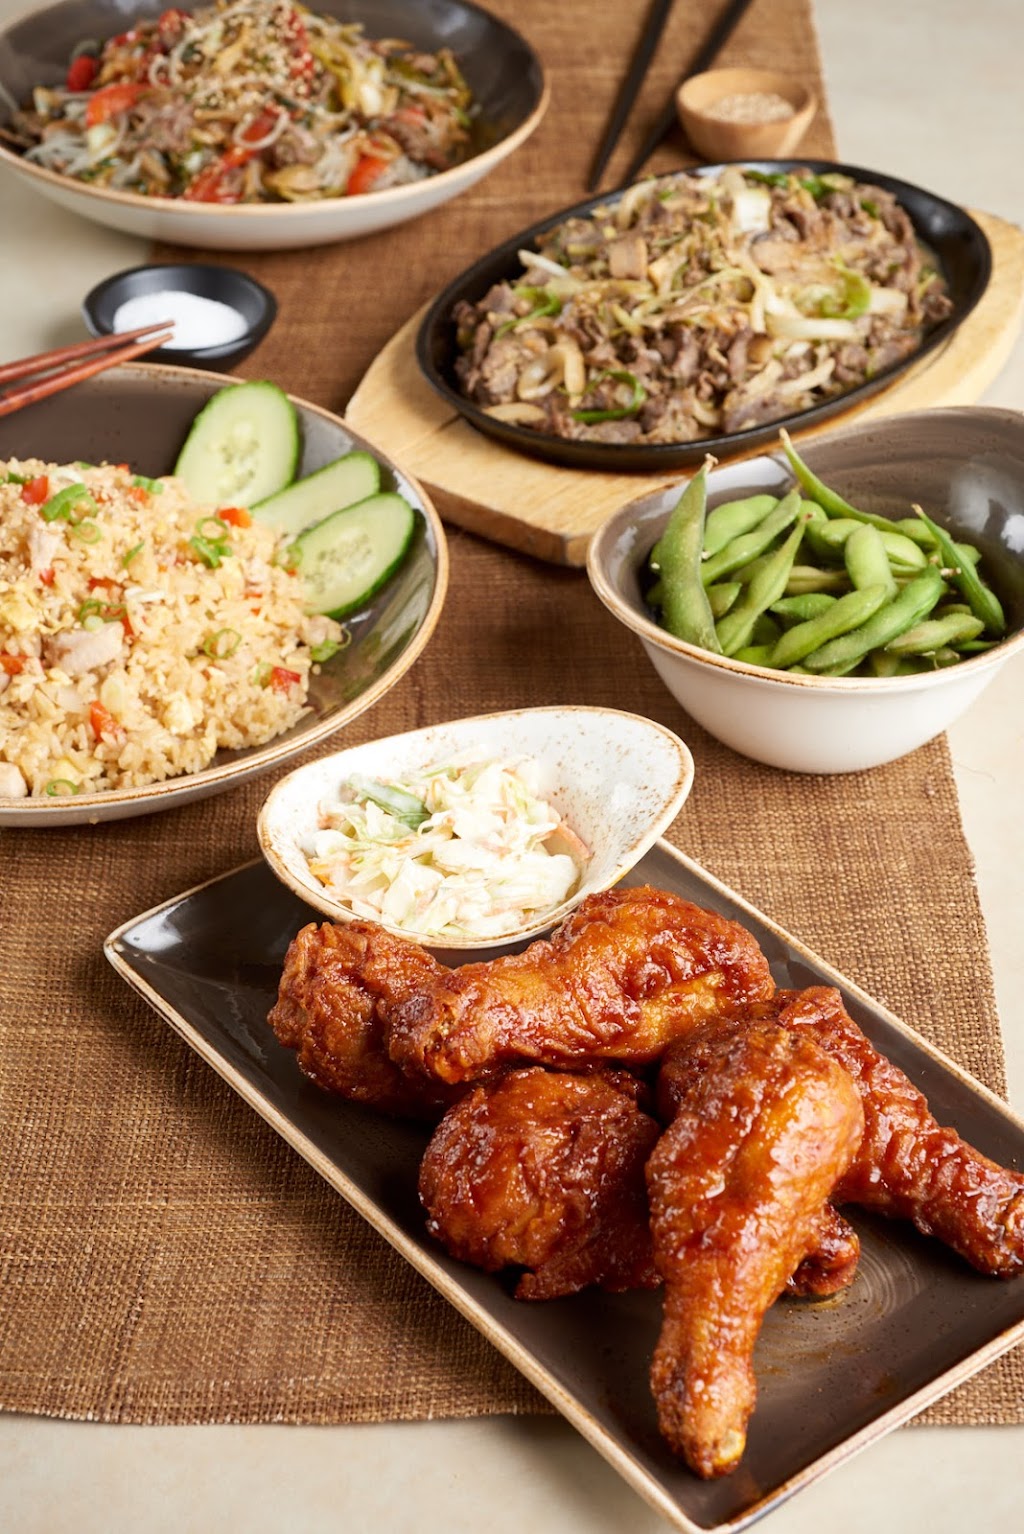 Bonchon Brentwood | 5611 Lone Tree Wy Suite 160, Brentwood, CA 94513 | Phone: (925) 517-6613